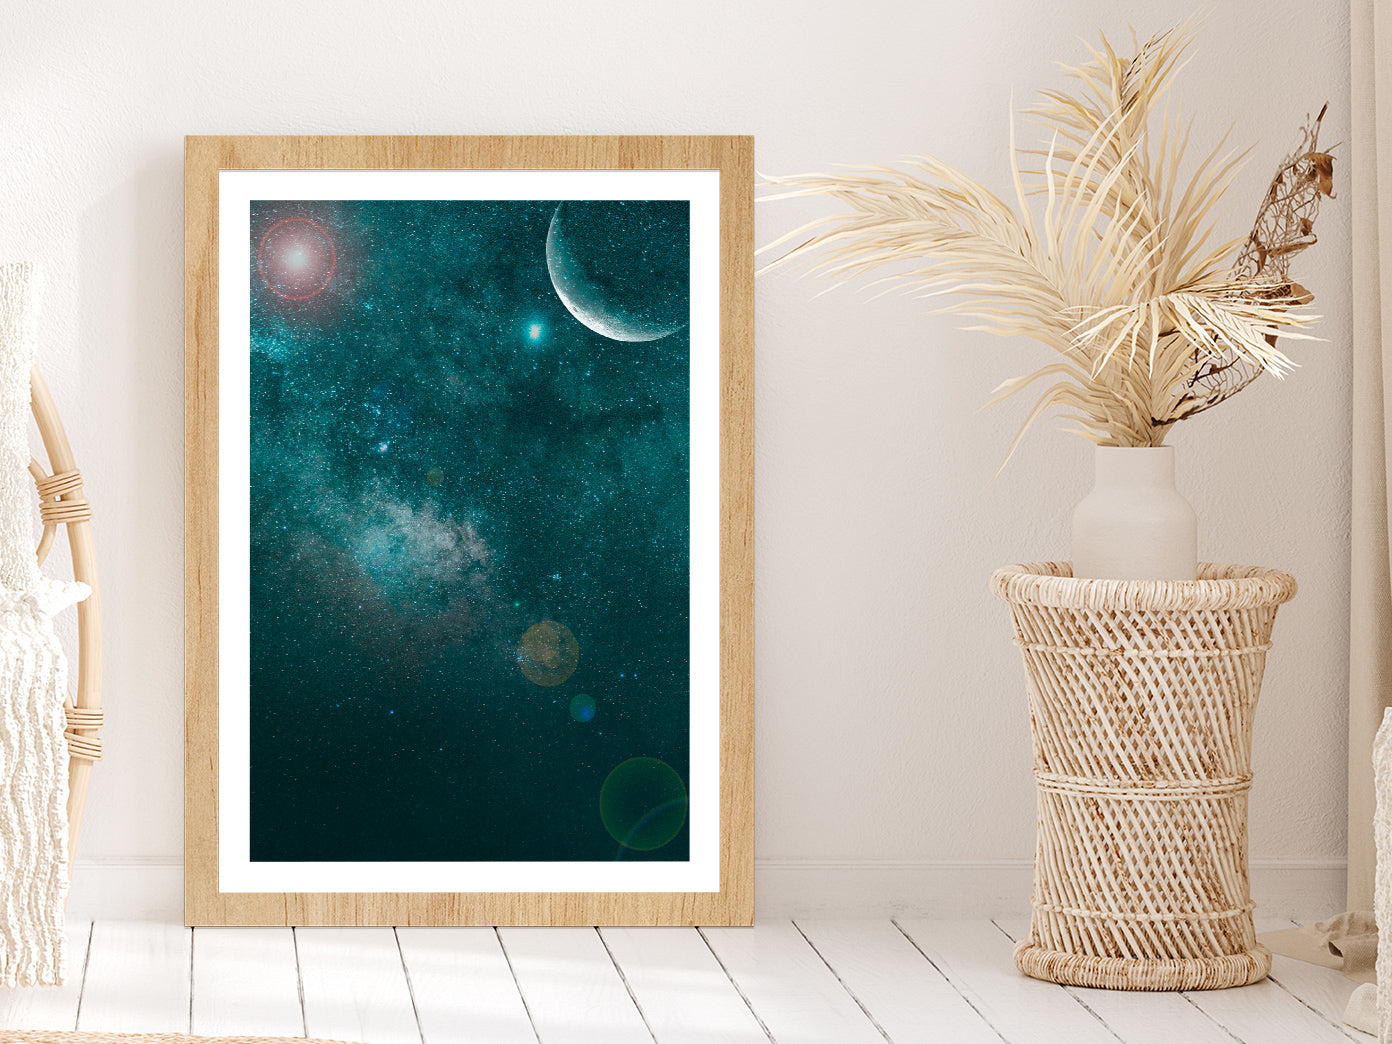 Milky Way Night Sky Clouds & Moon Glass Framed Wall Art, Ready to Hang Quality Print With White Border Oak